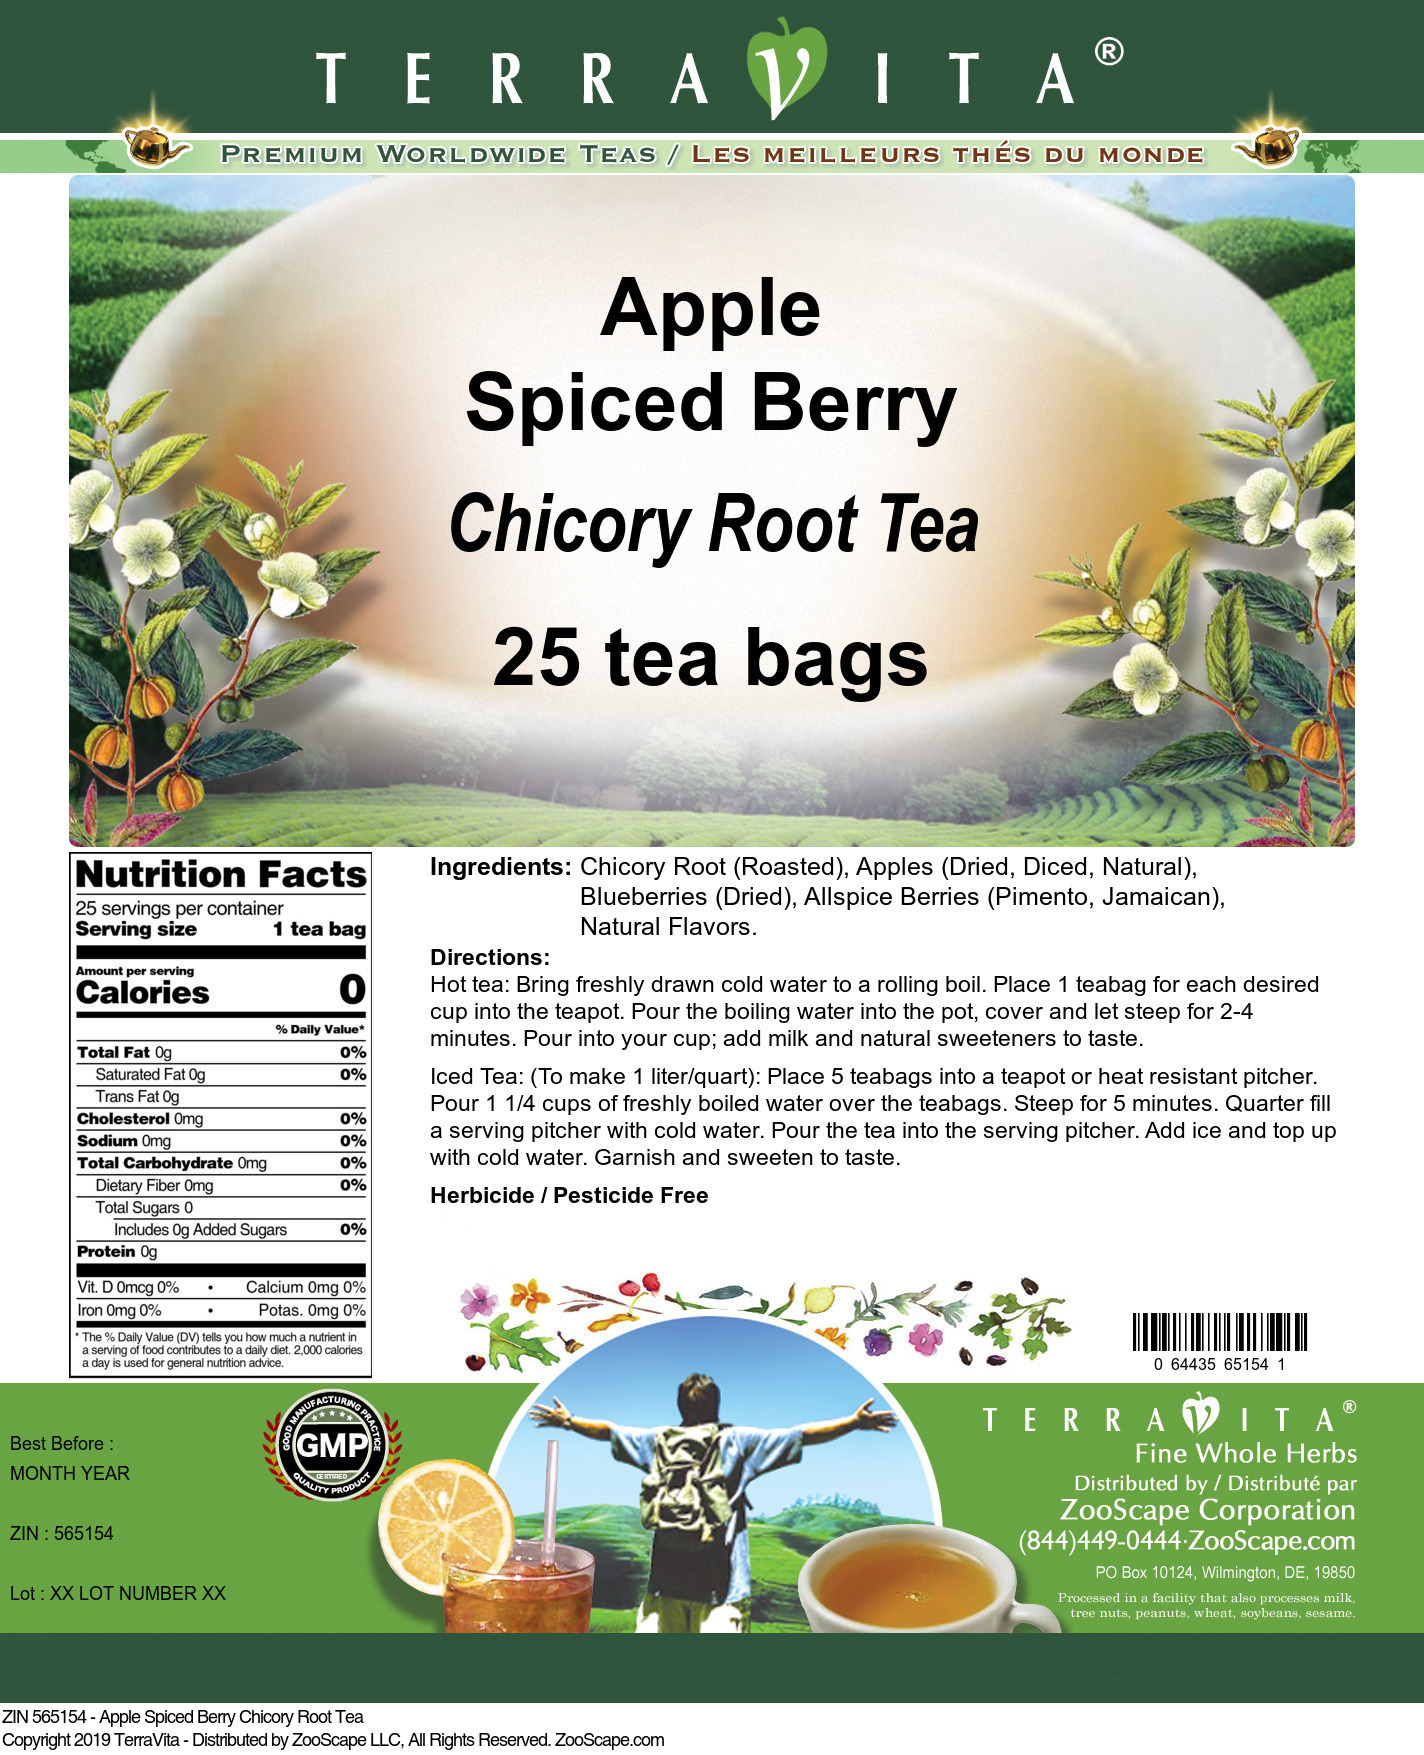 Apple Spiced Berry Chicory Root Tea - Label